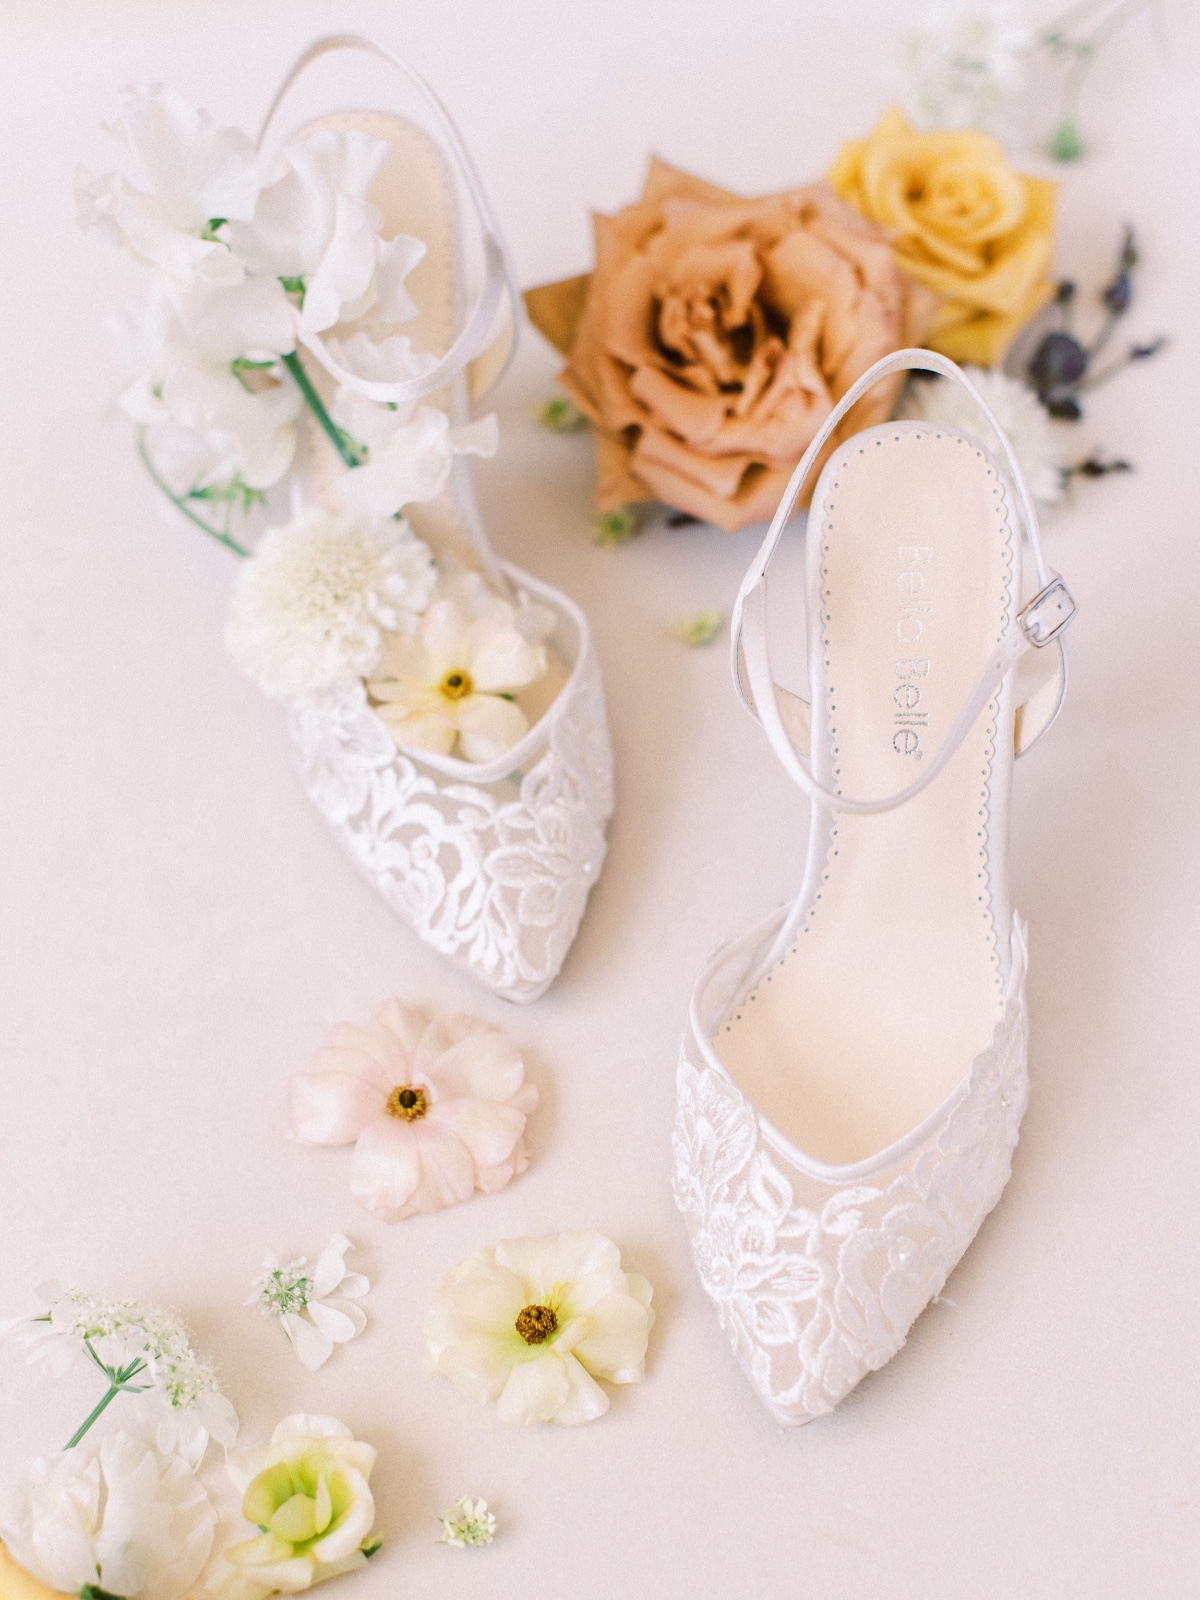 What Do You Get When You Combine The Current Wedding Trends Into One Design?